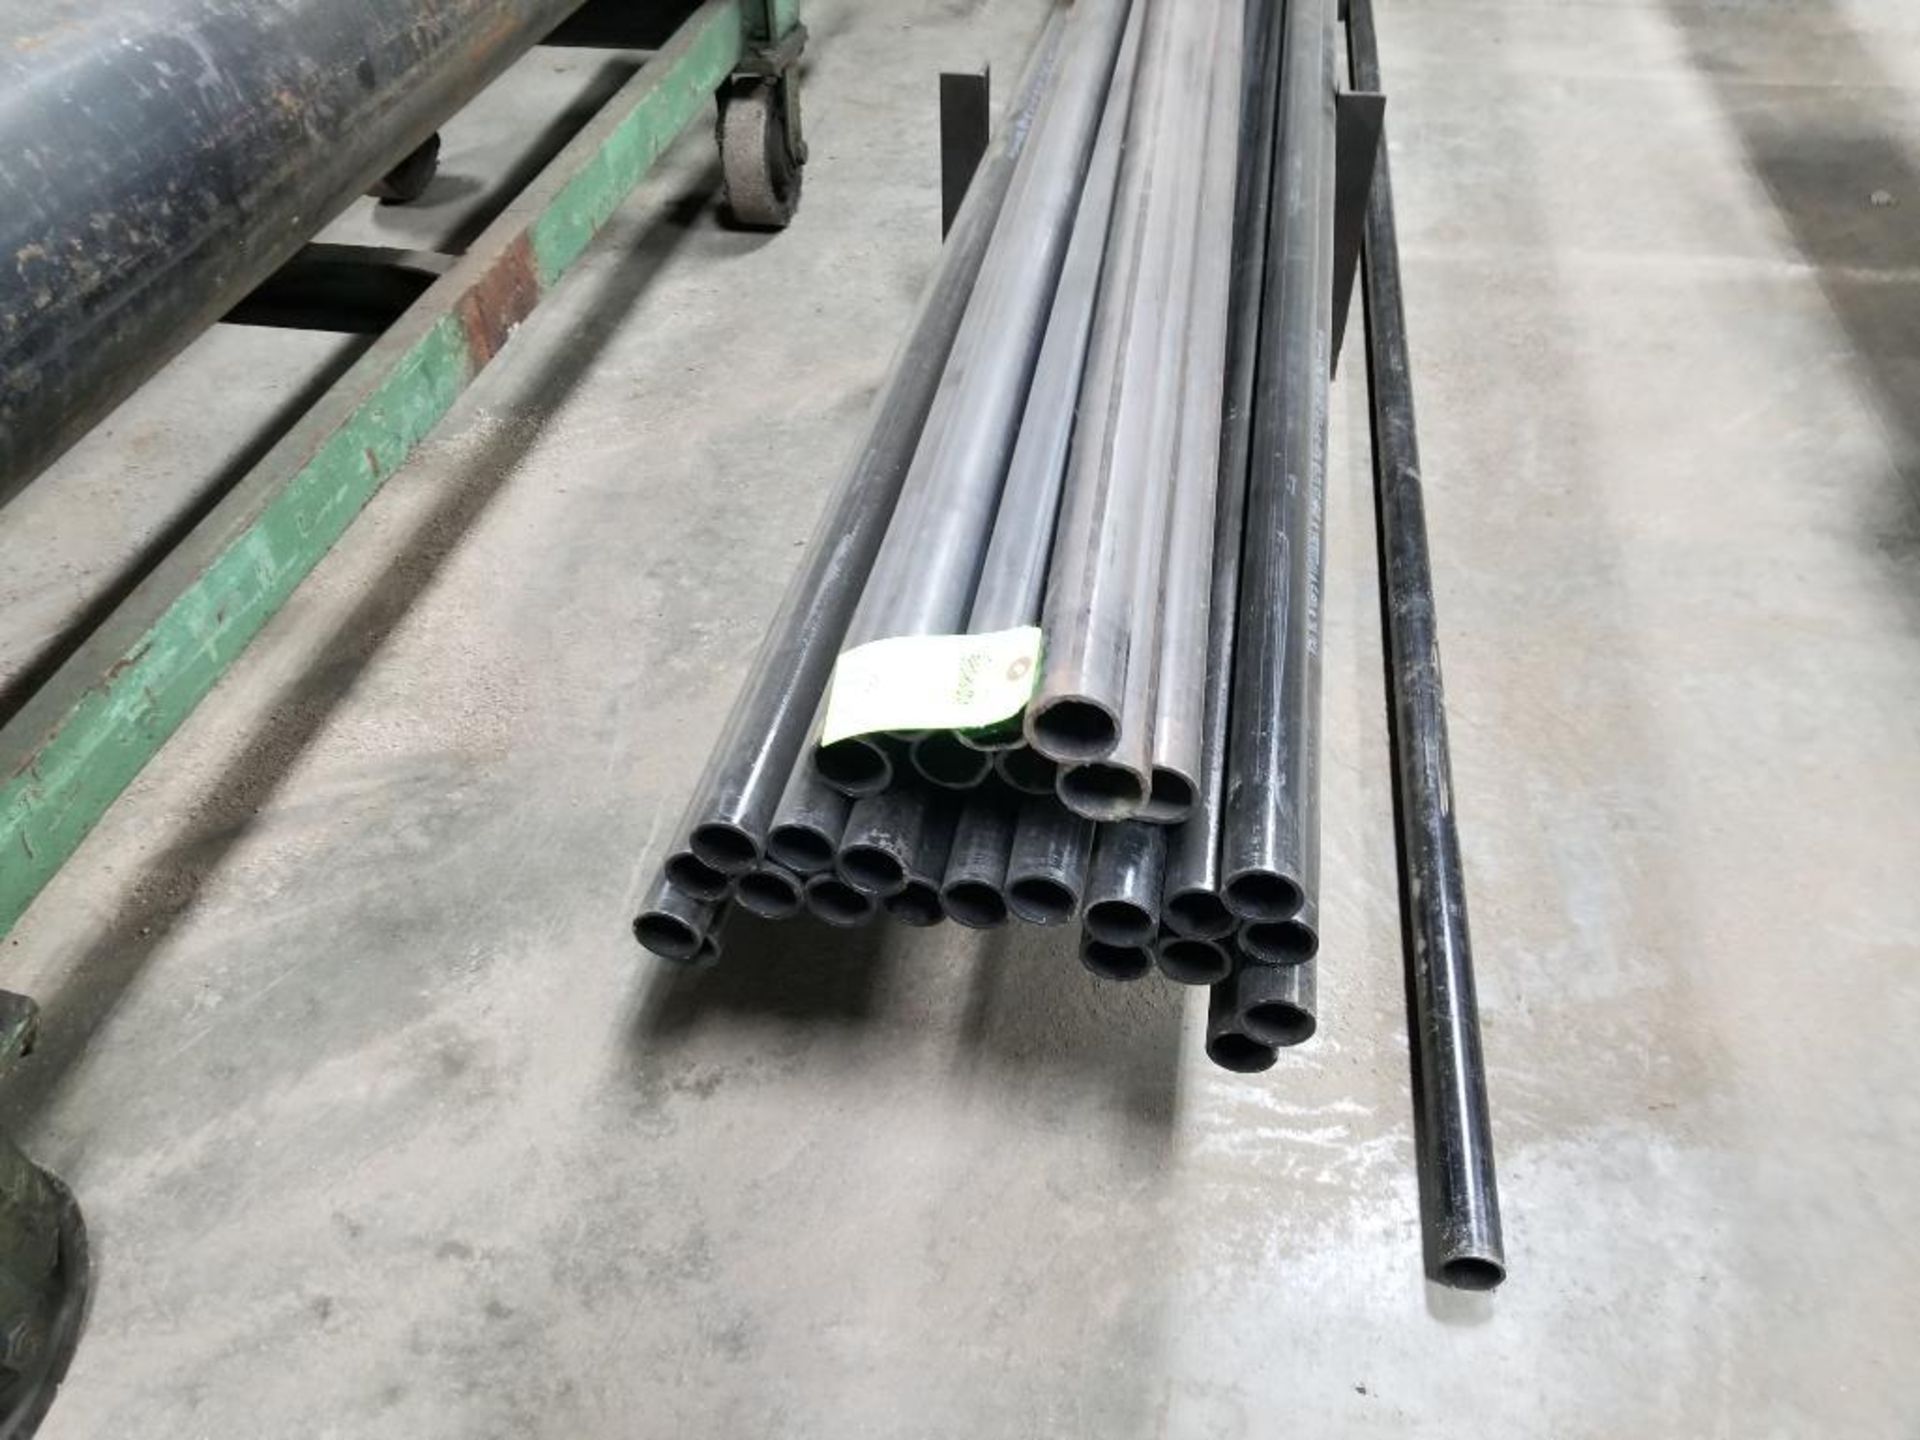 Large steel tubing in one section as pictured. - Image 3 of 3